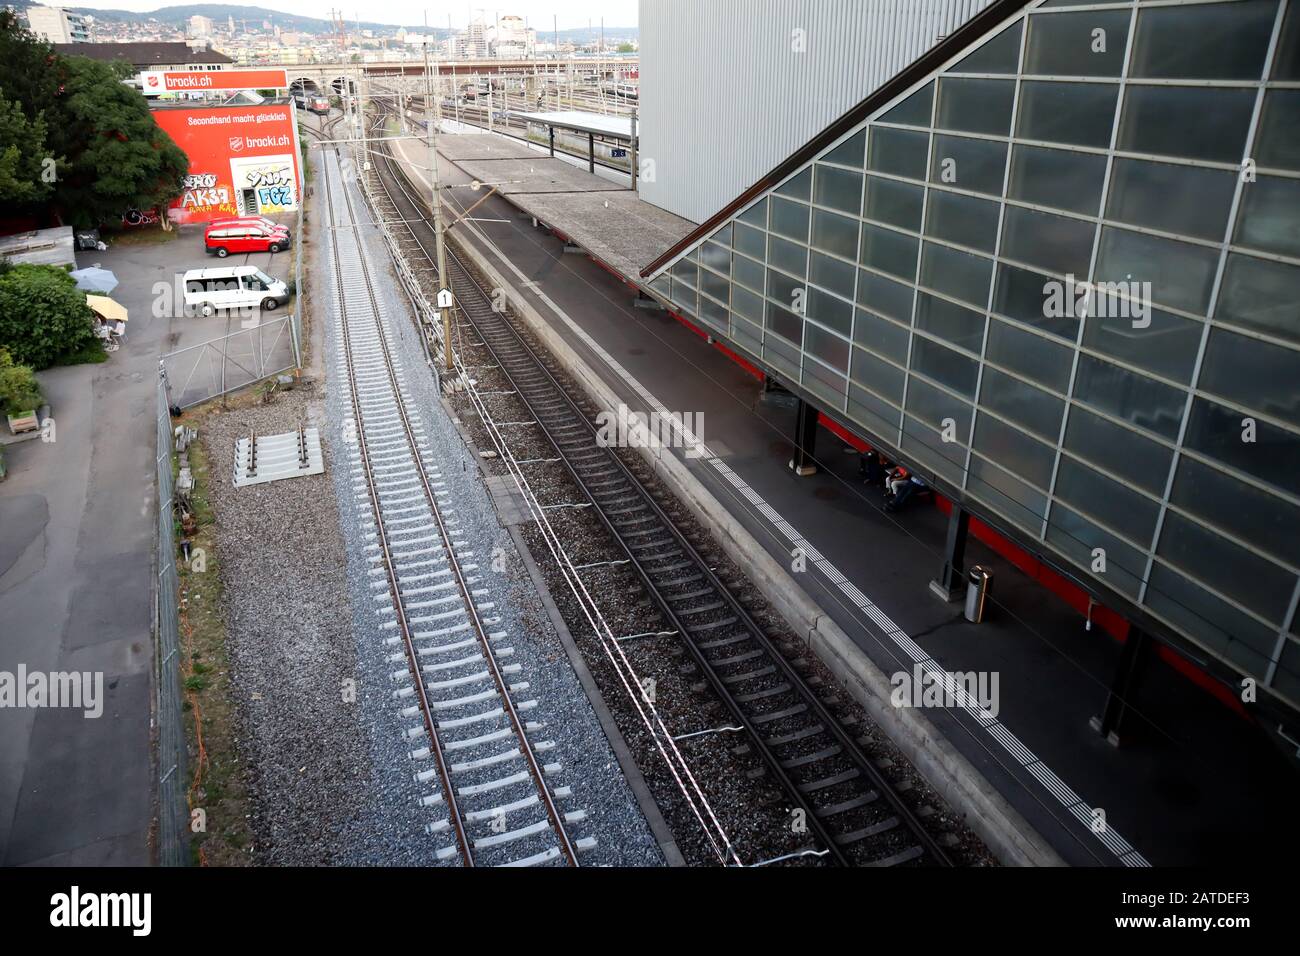 Zurich, Switzerland,July 22, 2019: top view of train tracks and modern building made of glass, empty railway in Zurich city by day Stock Photo